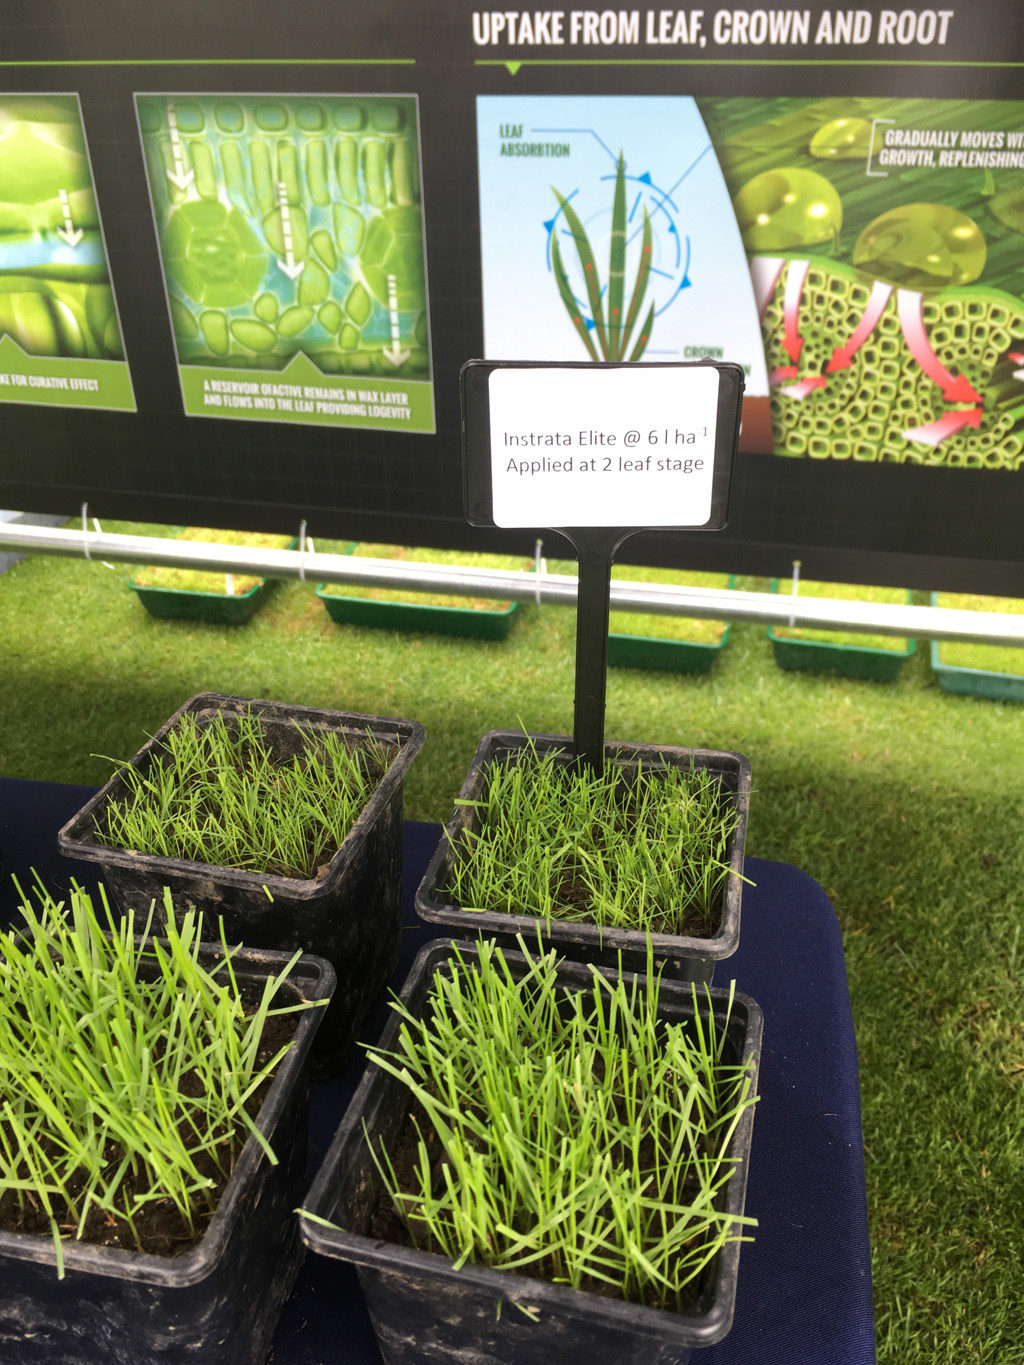 Instrata Elite results of STRI seedling fungicide application trials